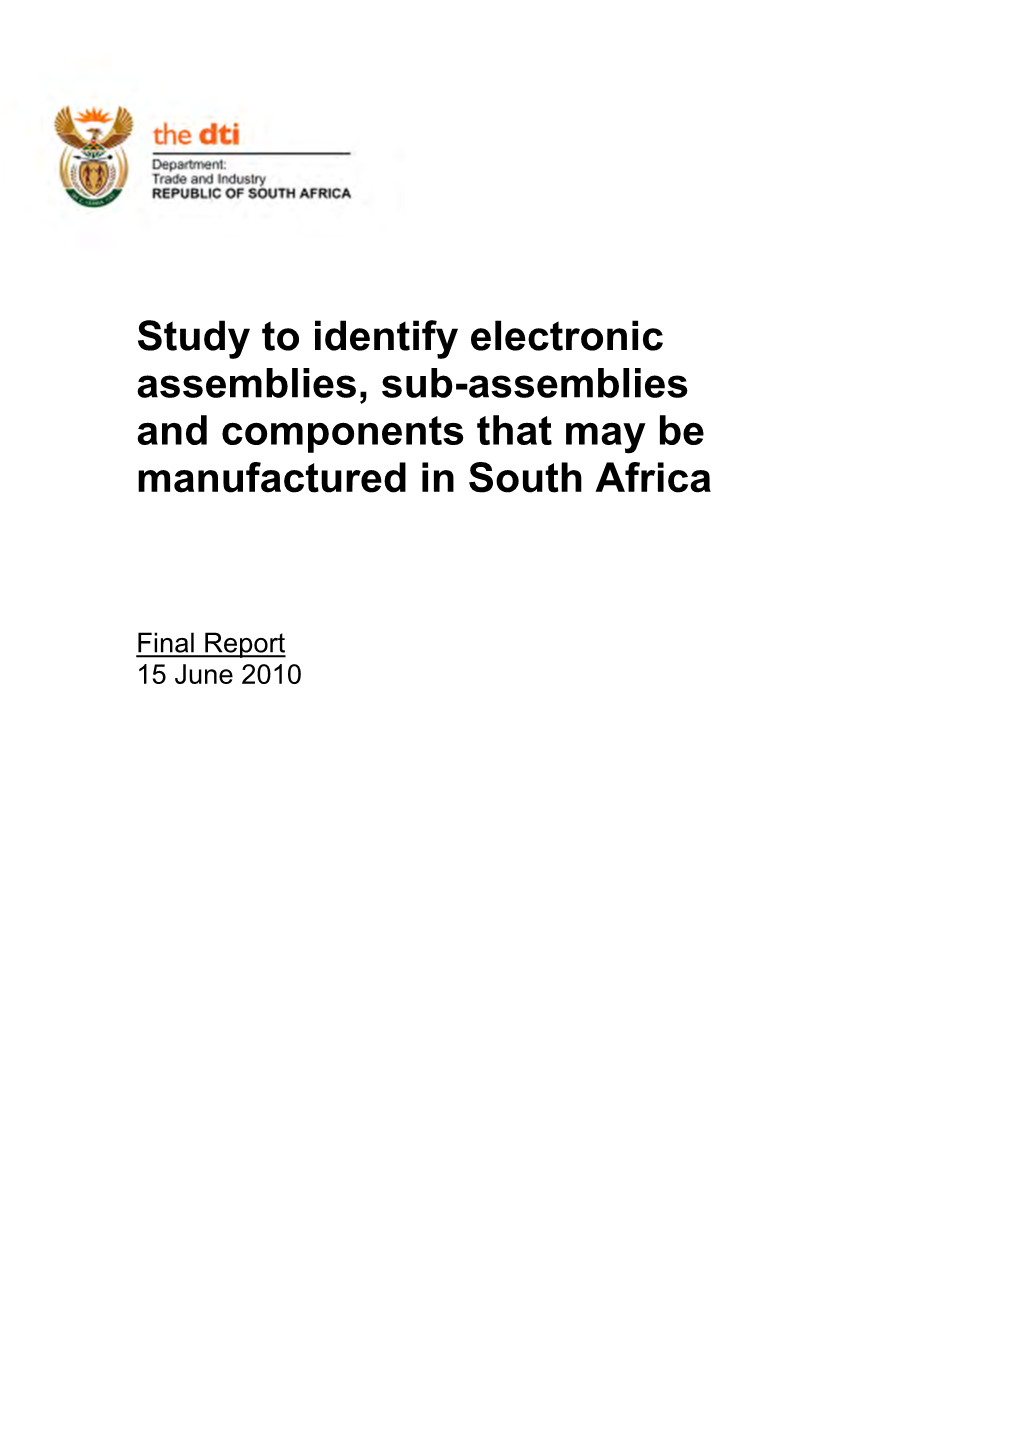 Study to Identify Electronic Assemblies, Sub-Assemblies and Components That May Be Manufactured in South Africa